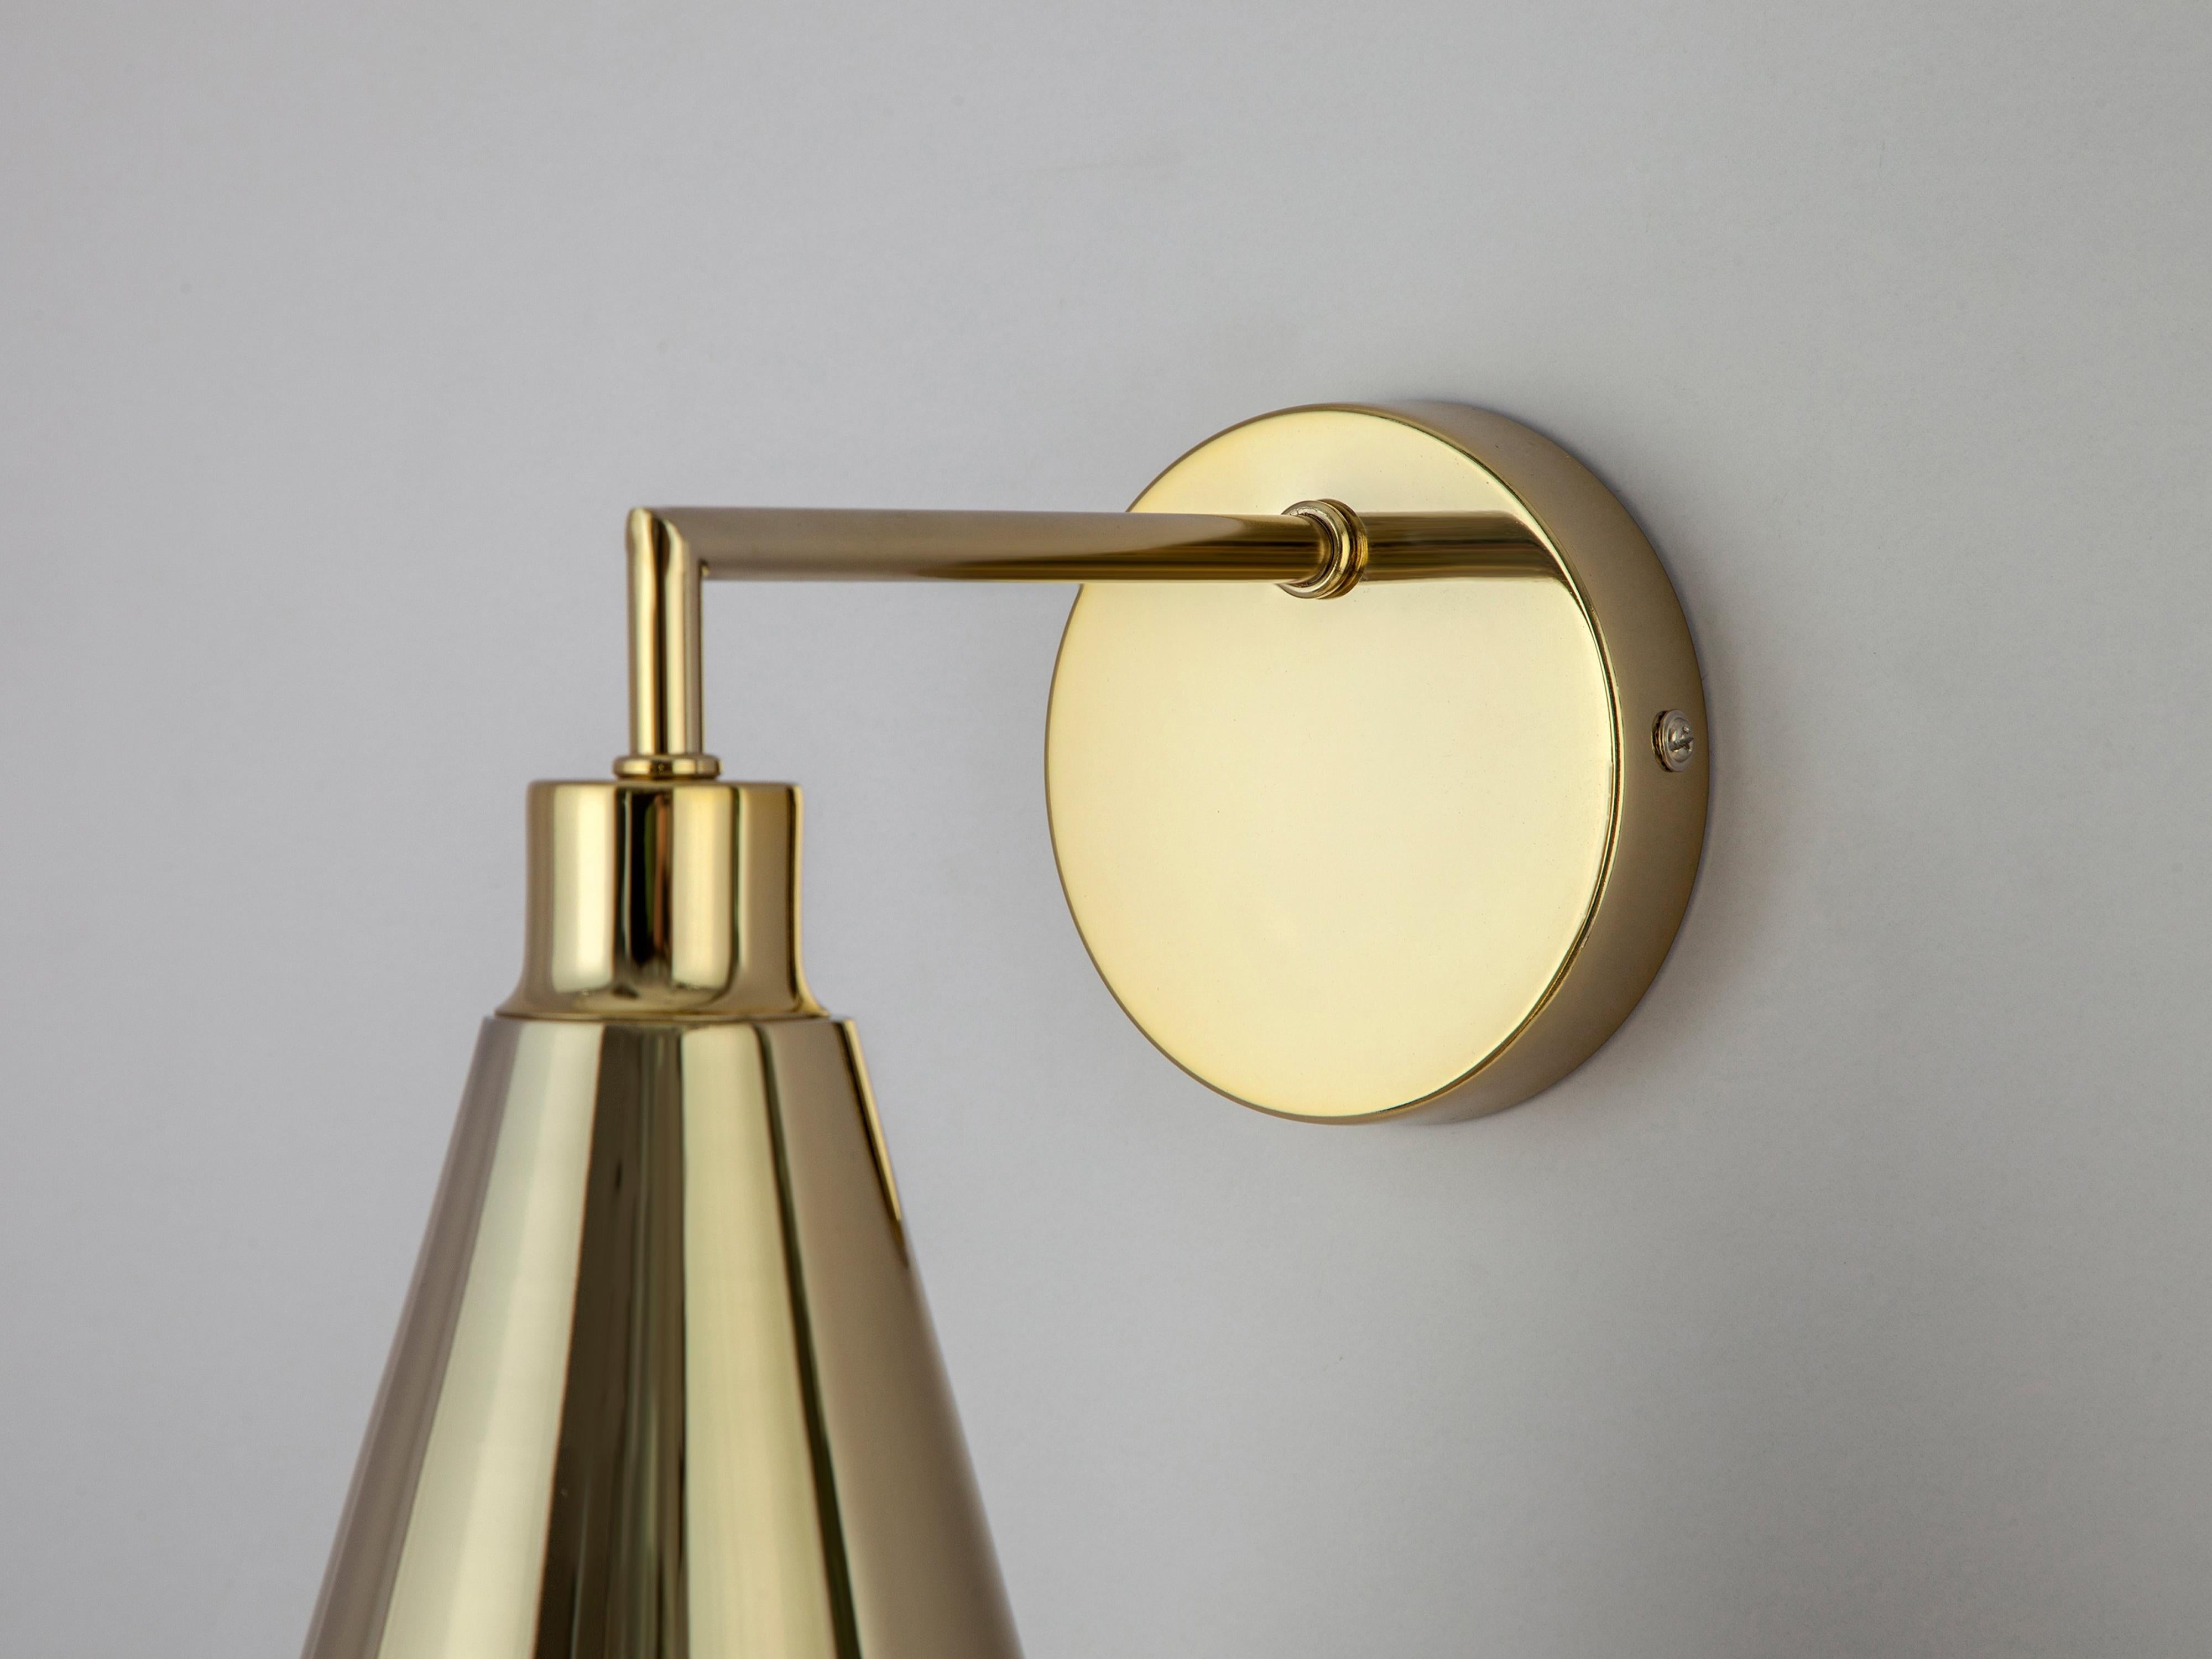 Houseof Brass Cone Shade Wall Light with Metal and Brass In New Condition For Sale In Bradford on Avon, GB